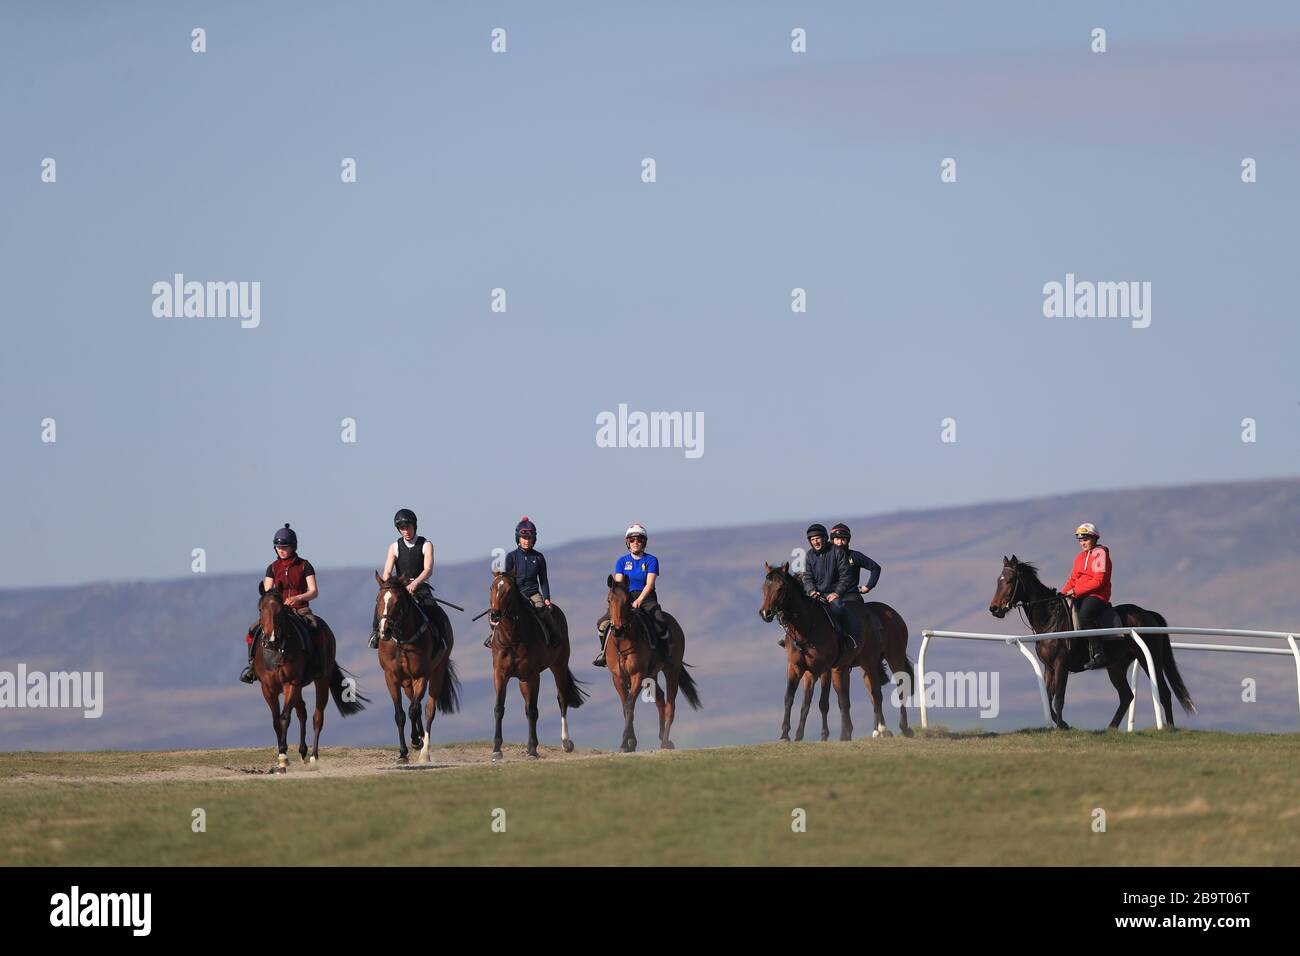 Racehorses at the gallops in Middleham. Trainers are being advised to continue gallops exercise, and adhere strictly to social-distancing requirements, following Prime Minister Boris Johnson’s announcement of new measures to combat the spread of coronavirus. Stock Photo